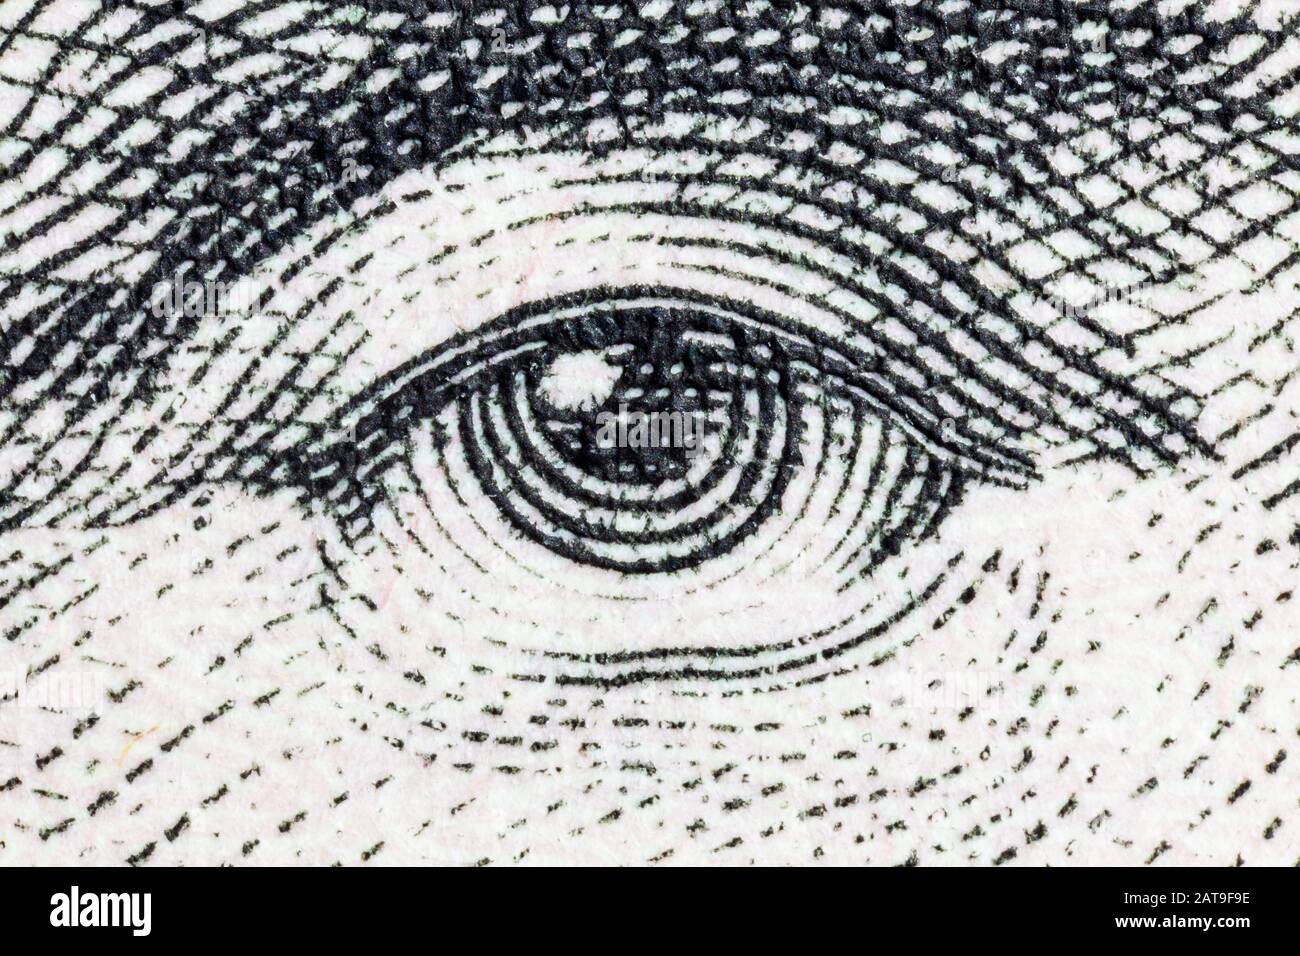 Macro close up photograph of Abraham Lincoln eye on the US five dollar bill. Stock Photo